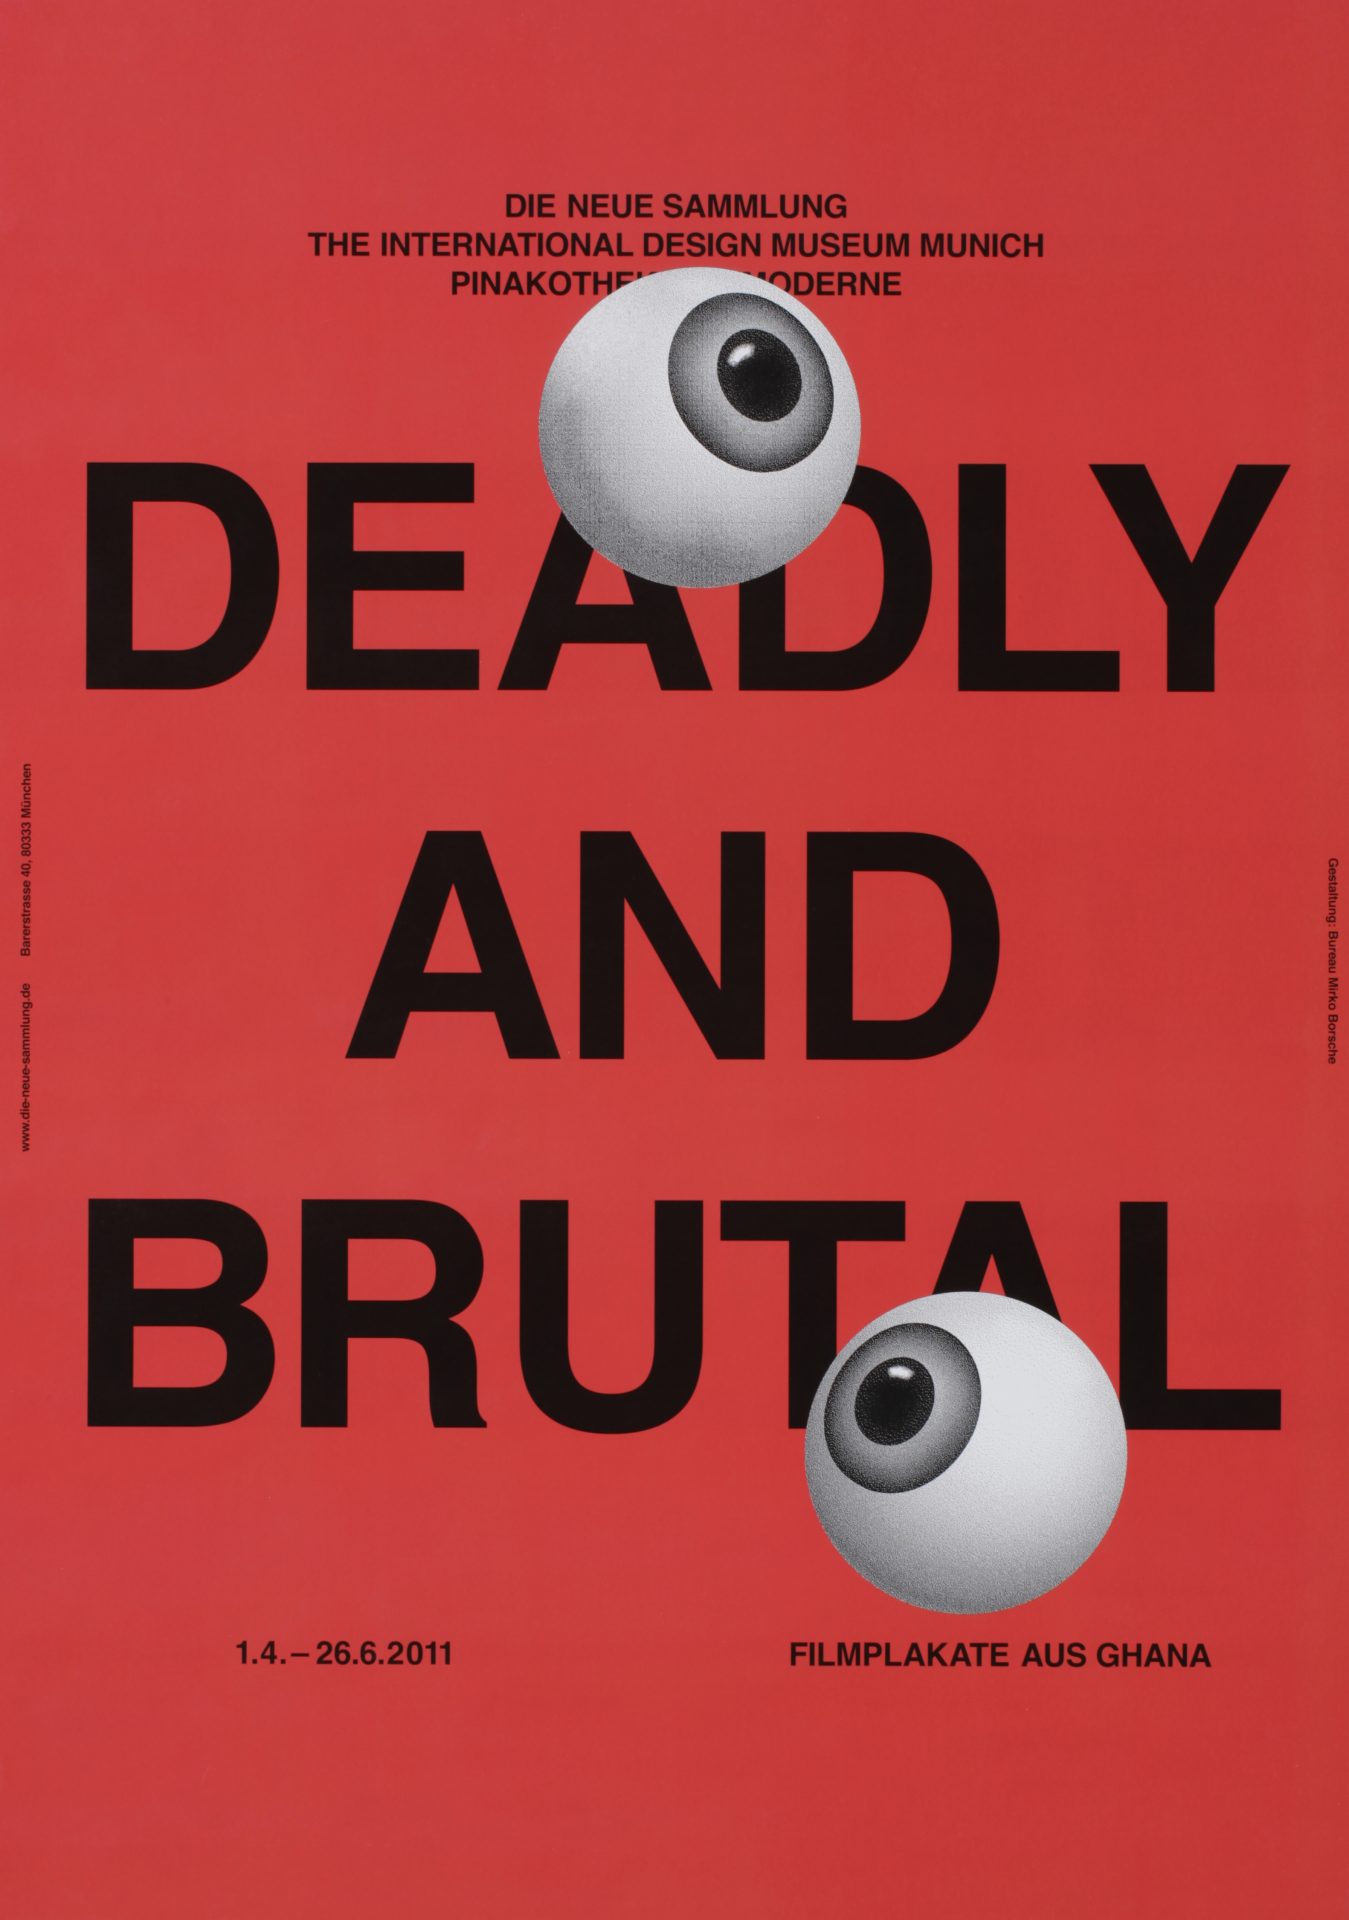 The exhibition poster features the exhibition title in black capitals on a red background as well as two three-dimensional eyes, which overlay the lettering and look to the right and left respectively.